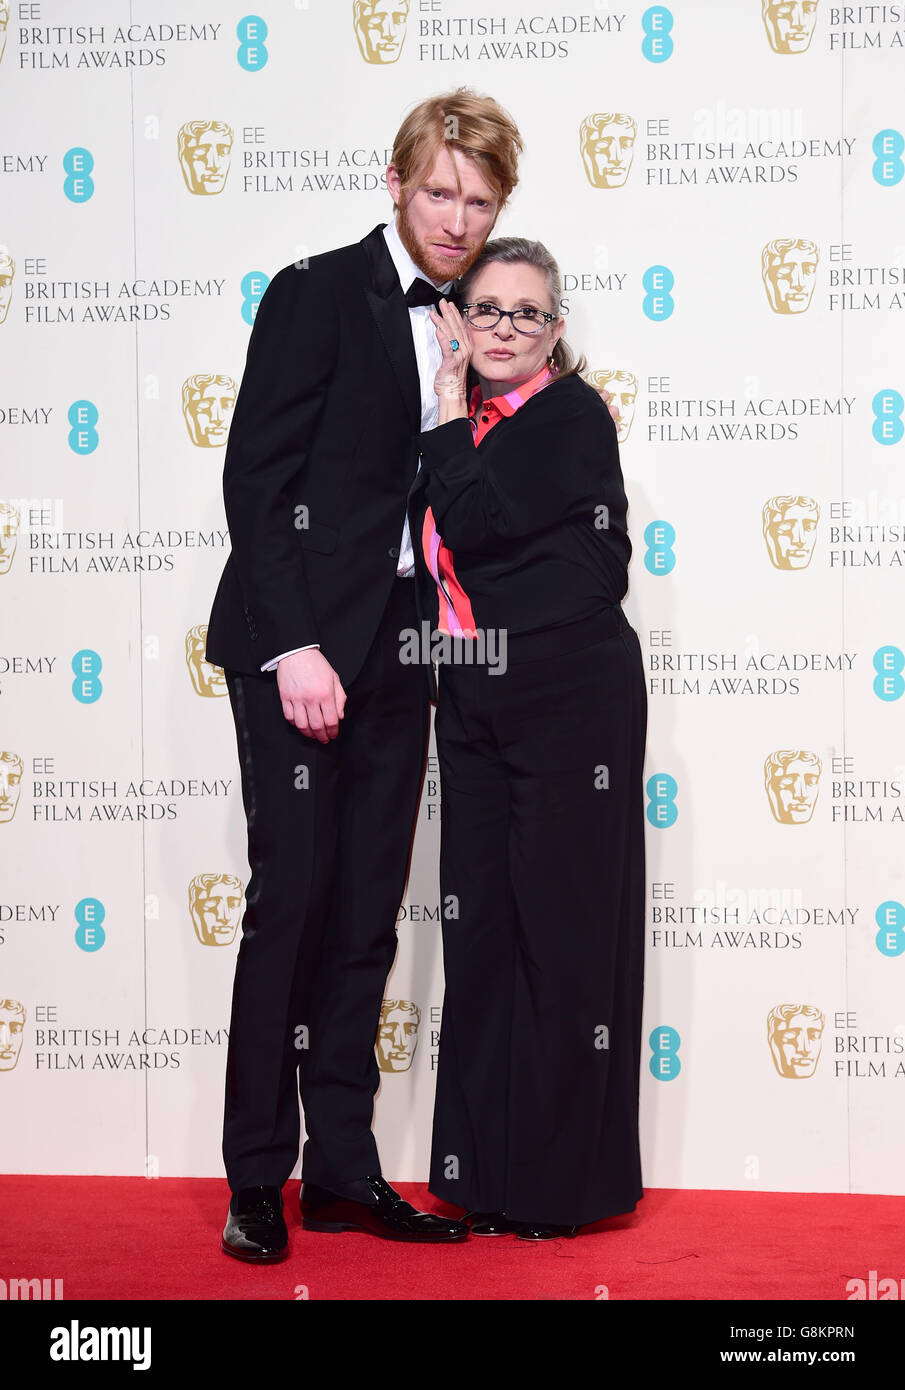 Domhnall Gleeson and Carrie Fisher in the press room at the EE British Academy Film Awards at the Royal Opera House, Bow Street, London. PRESS ASSOCIATION Photo. Picture date: Sunday February 14, 2016. See PA Story SHOWBIZ Baftas. Photo credit should read: Ian West/PA Wire Stock Photo